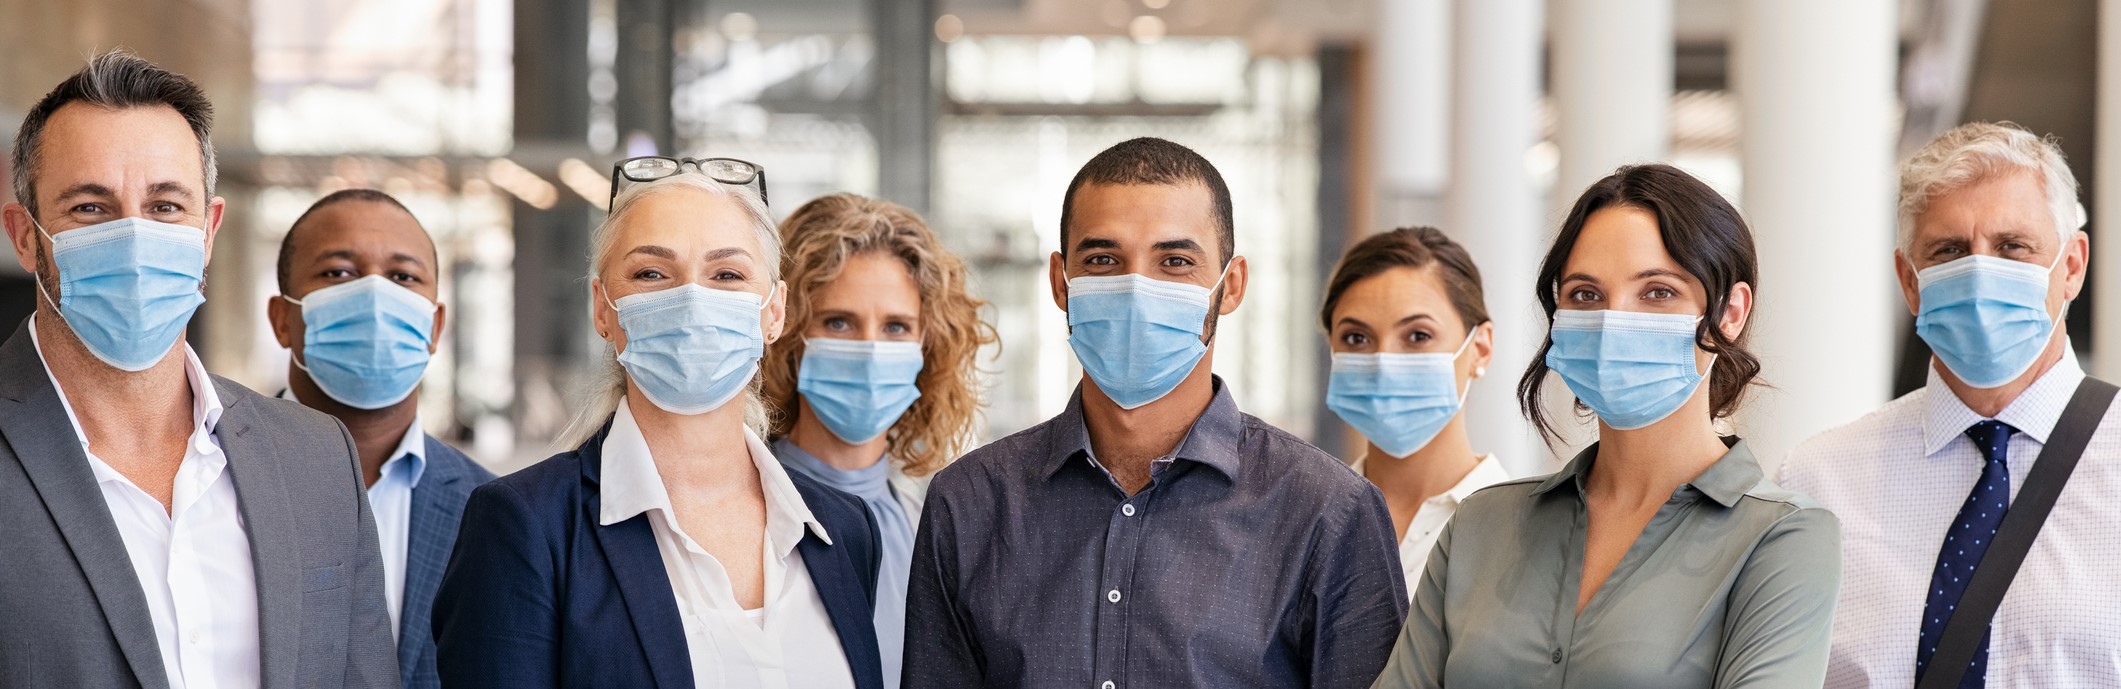 Employees with face masks